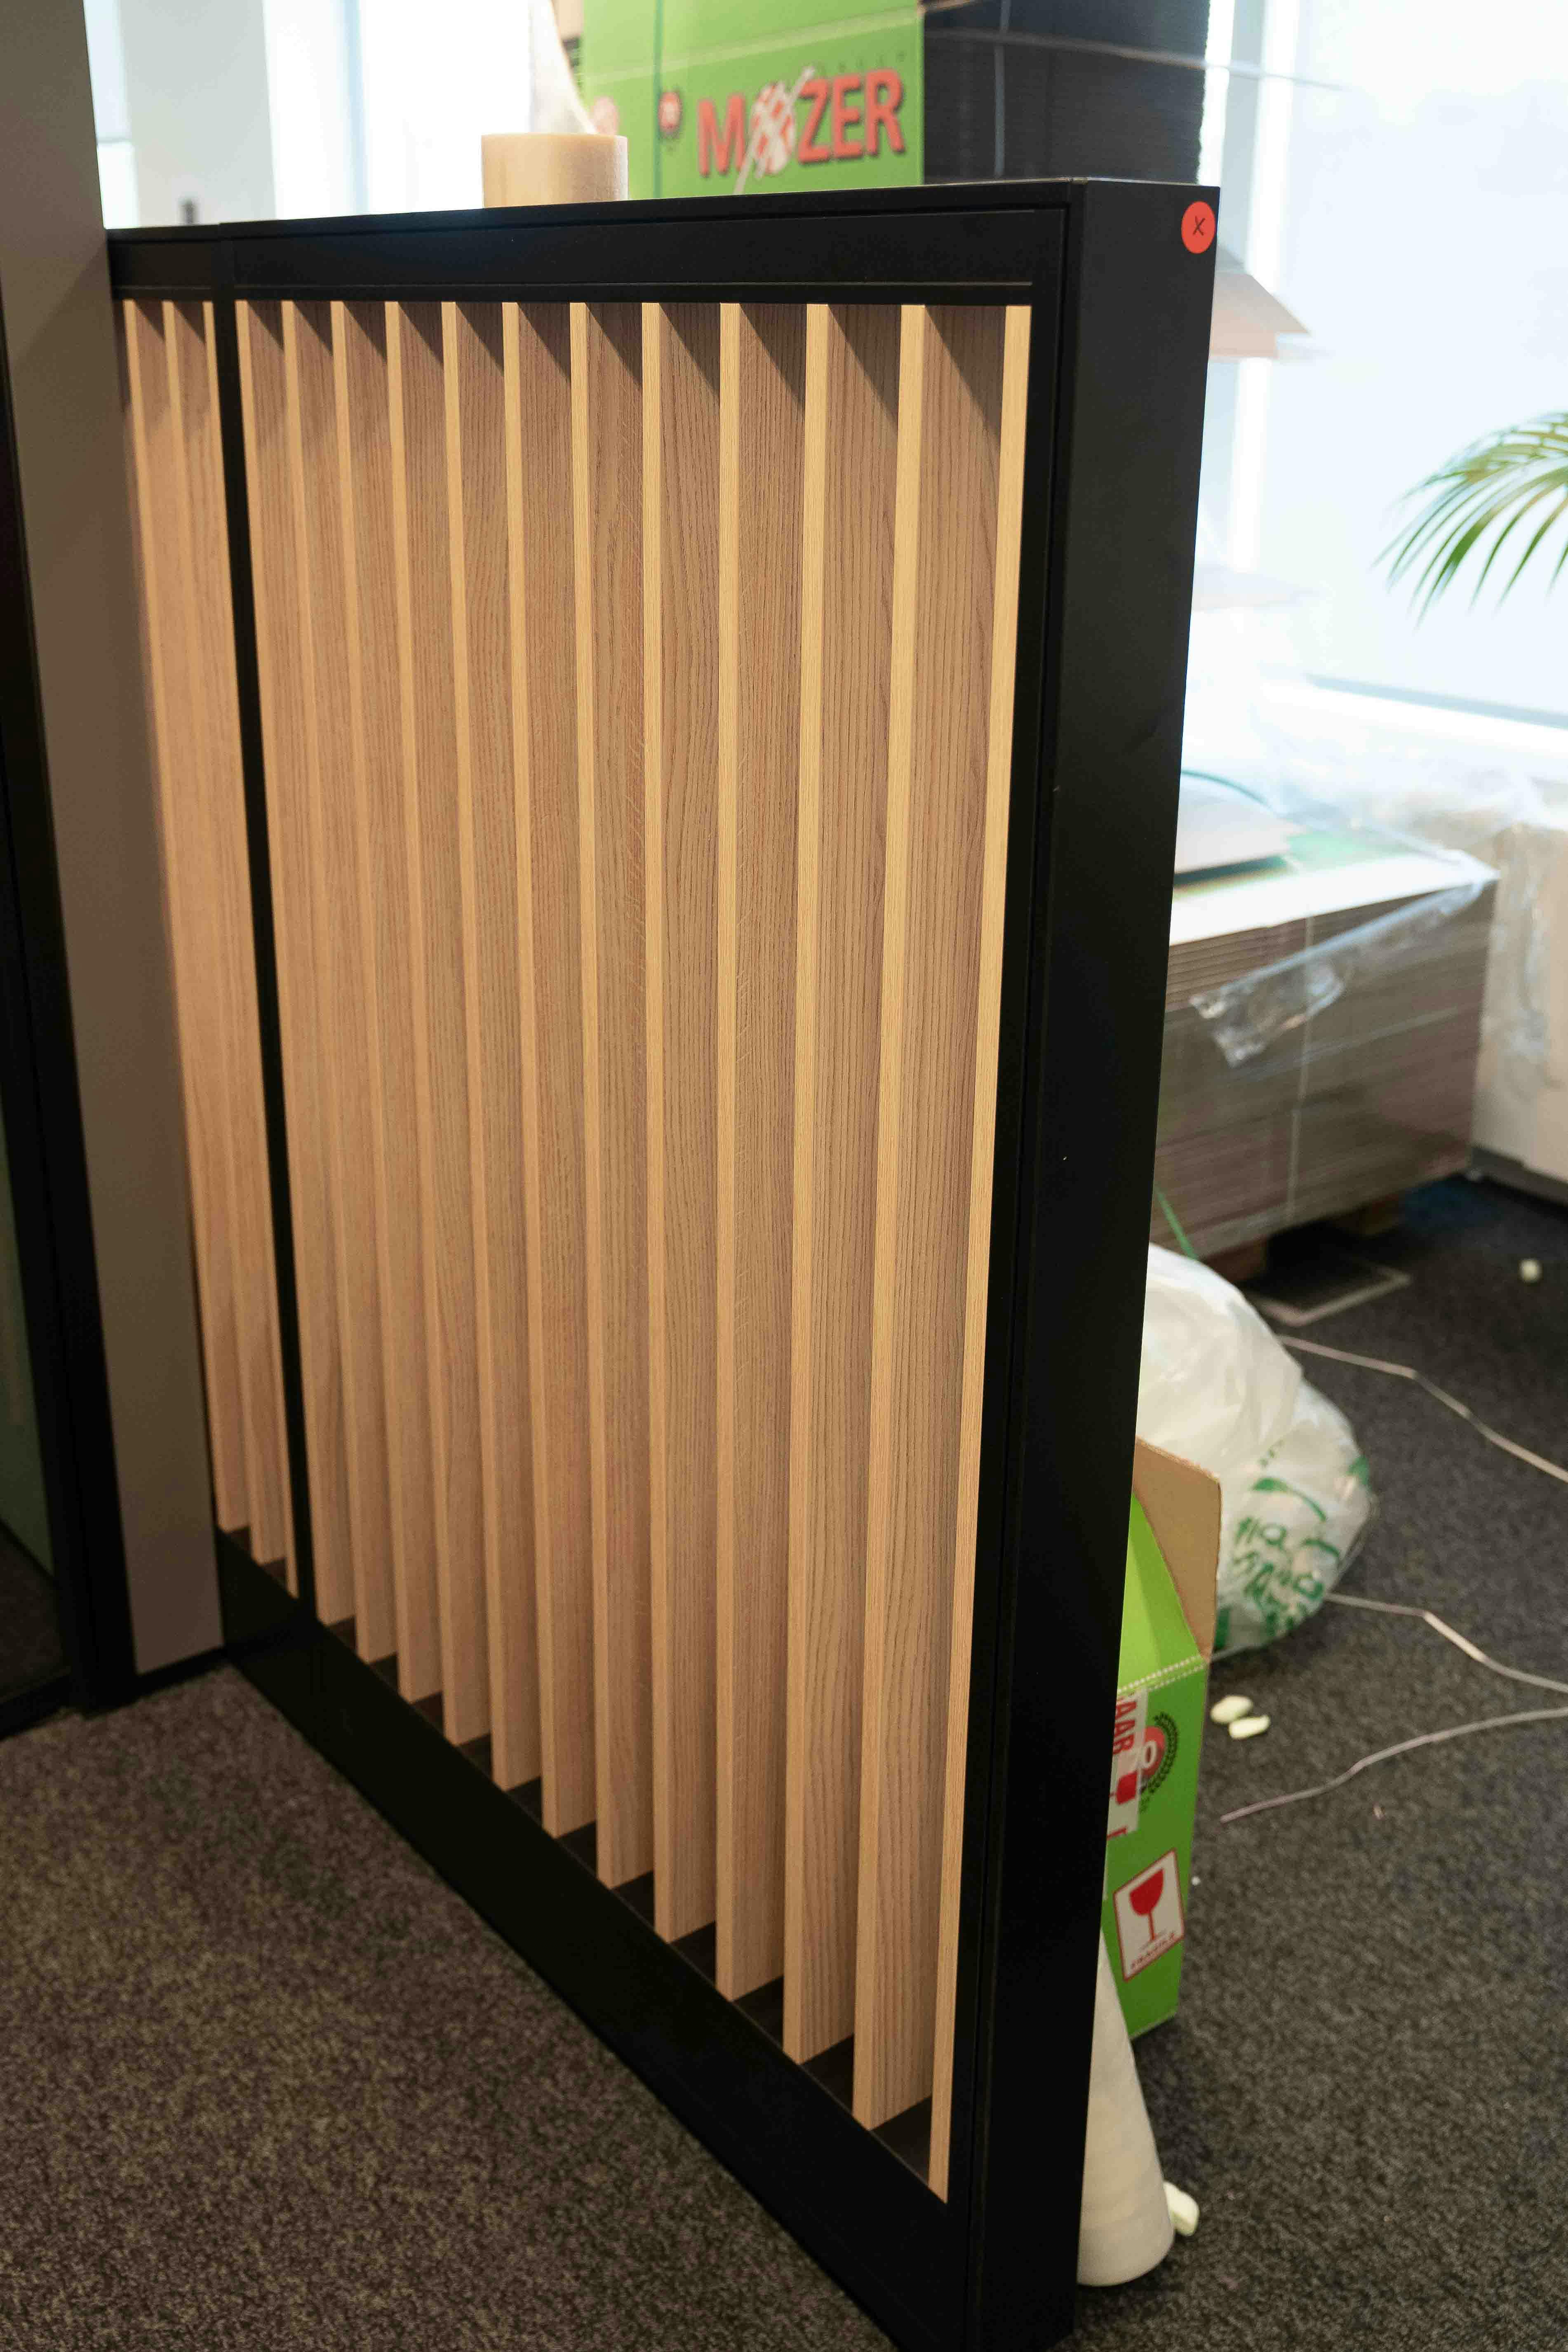 Natural Wood Slat Room Divider with Black support and a green/blue part in cushion - Relieve Furniture